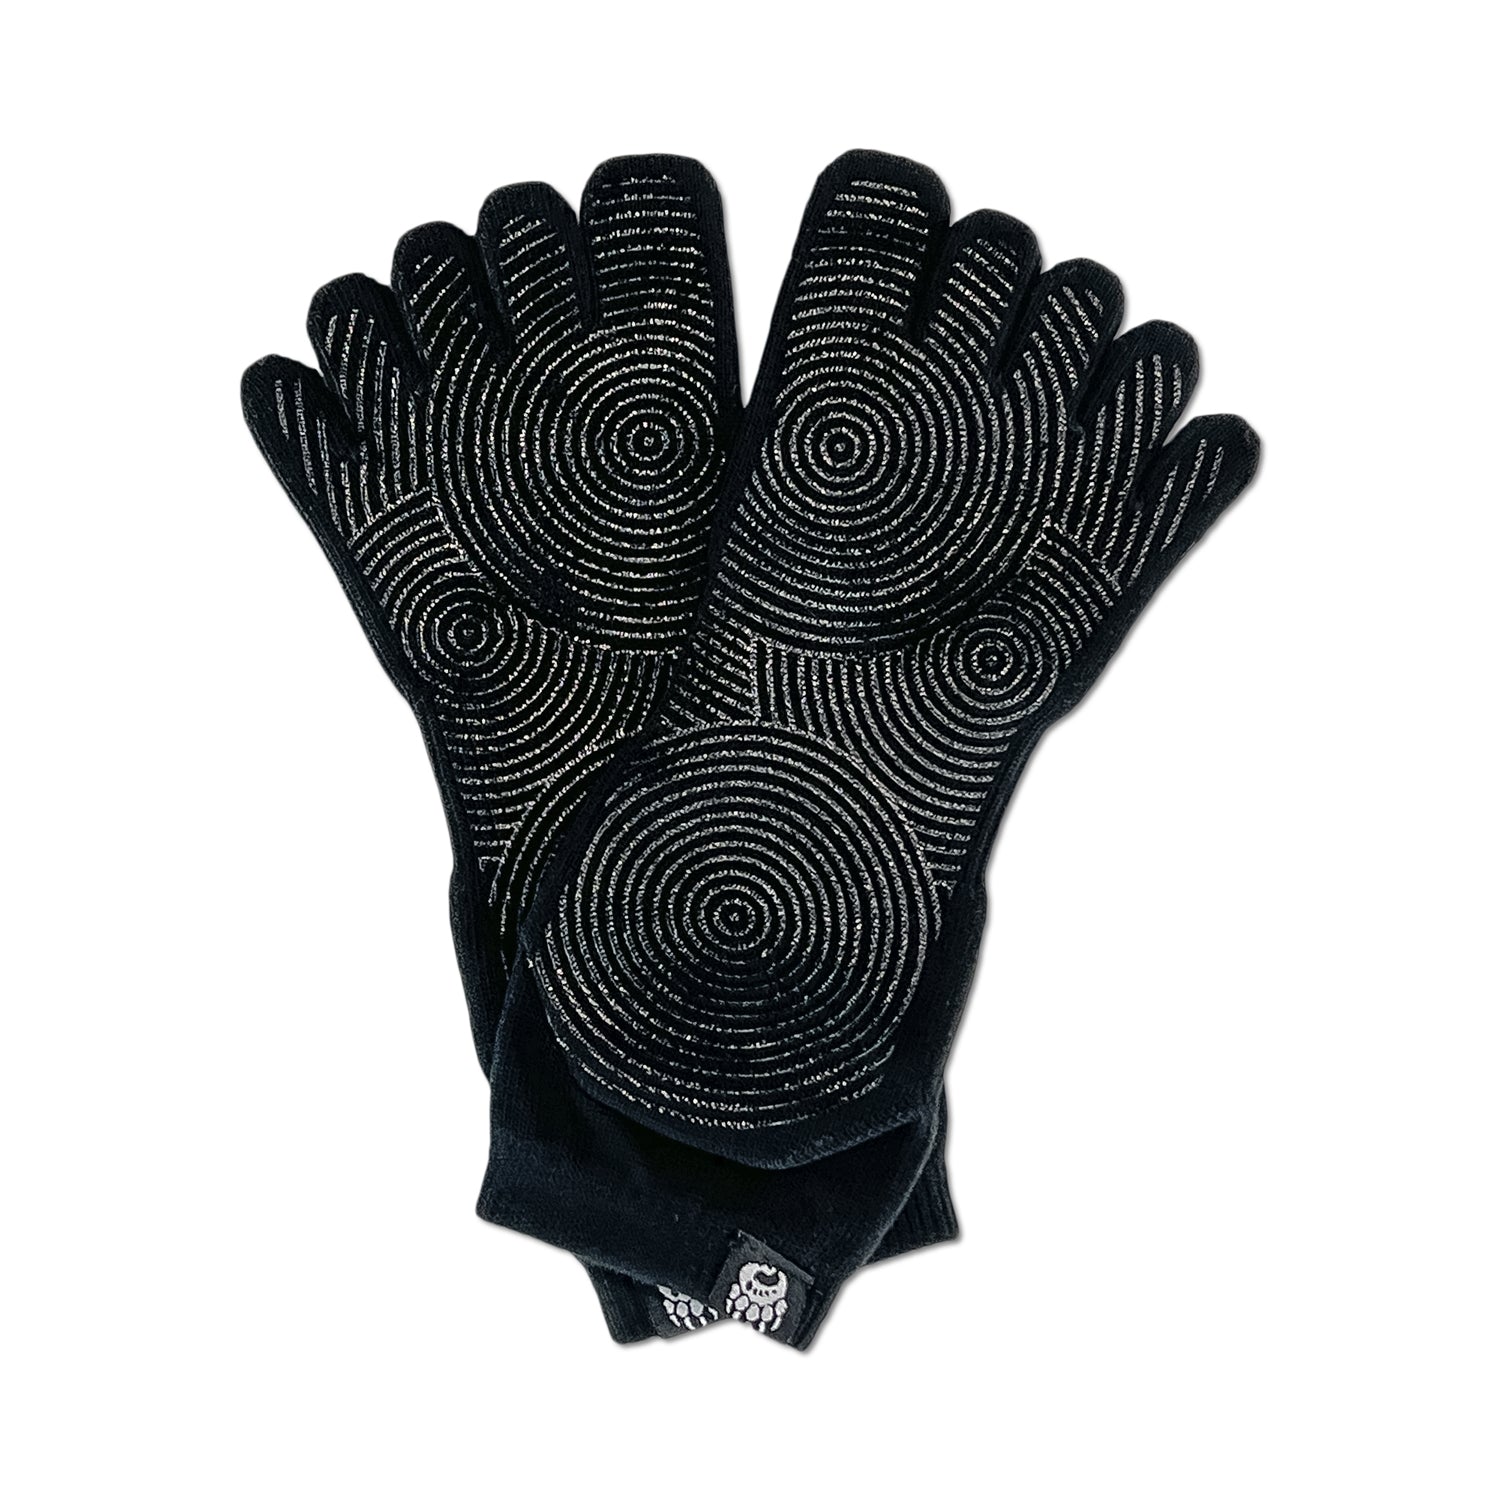 A pair of Bearfoot black textured radial grip socks with white spiral patterns and moisture-wicking comfort.